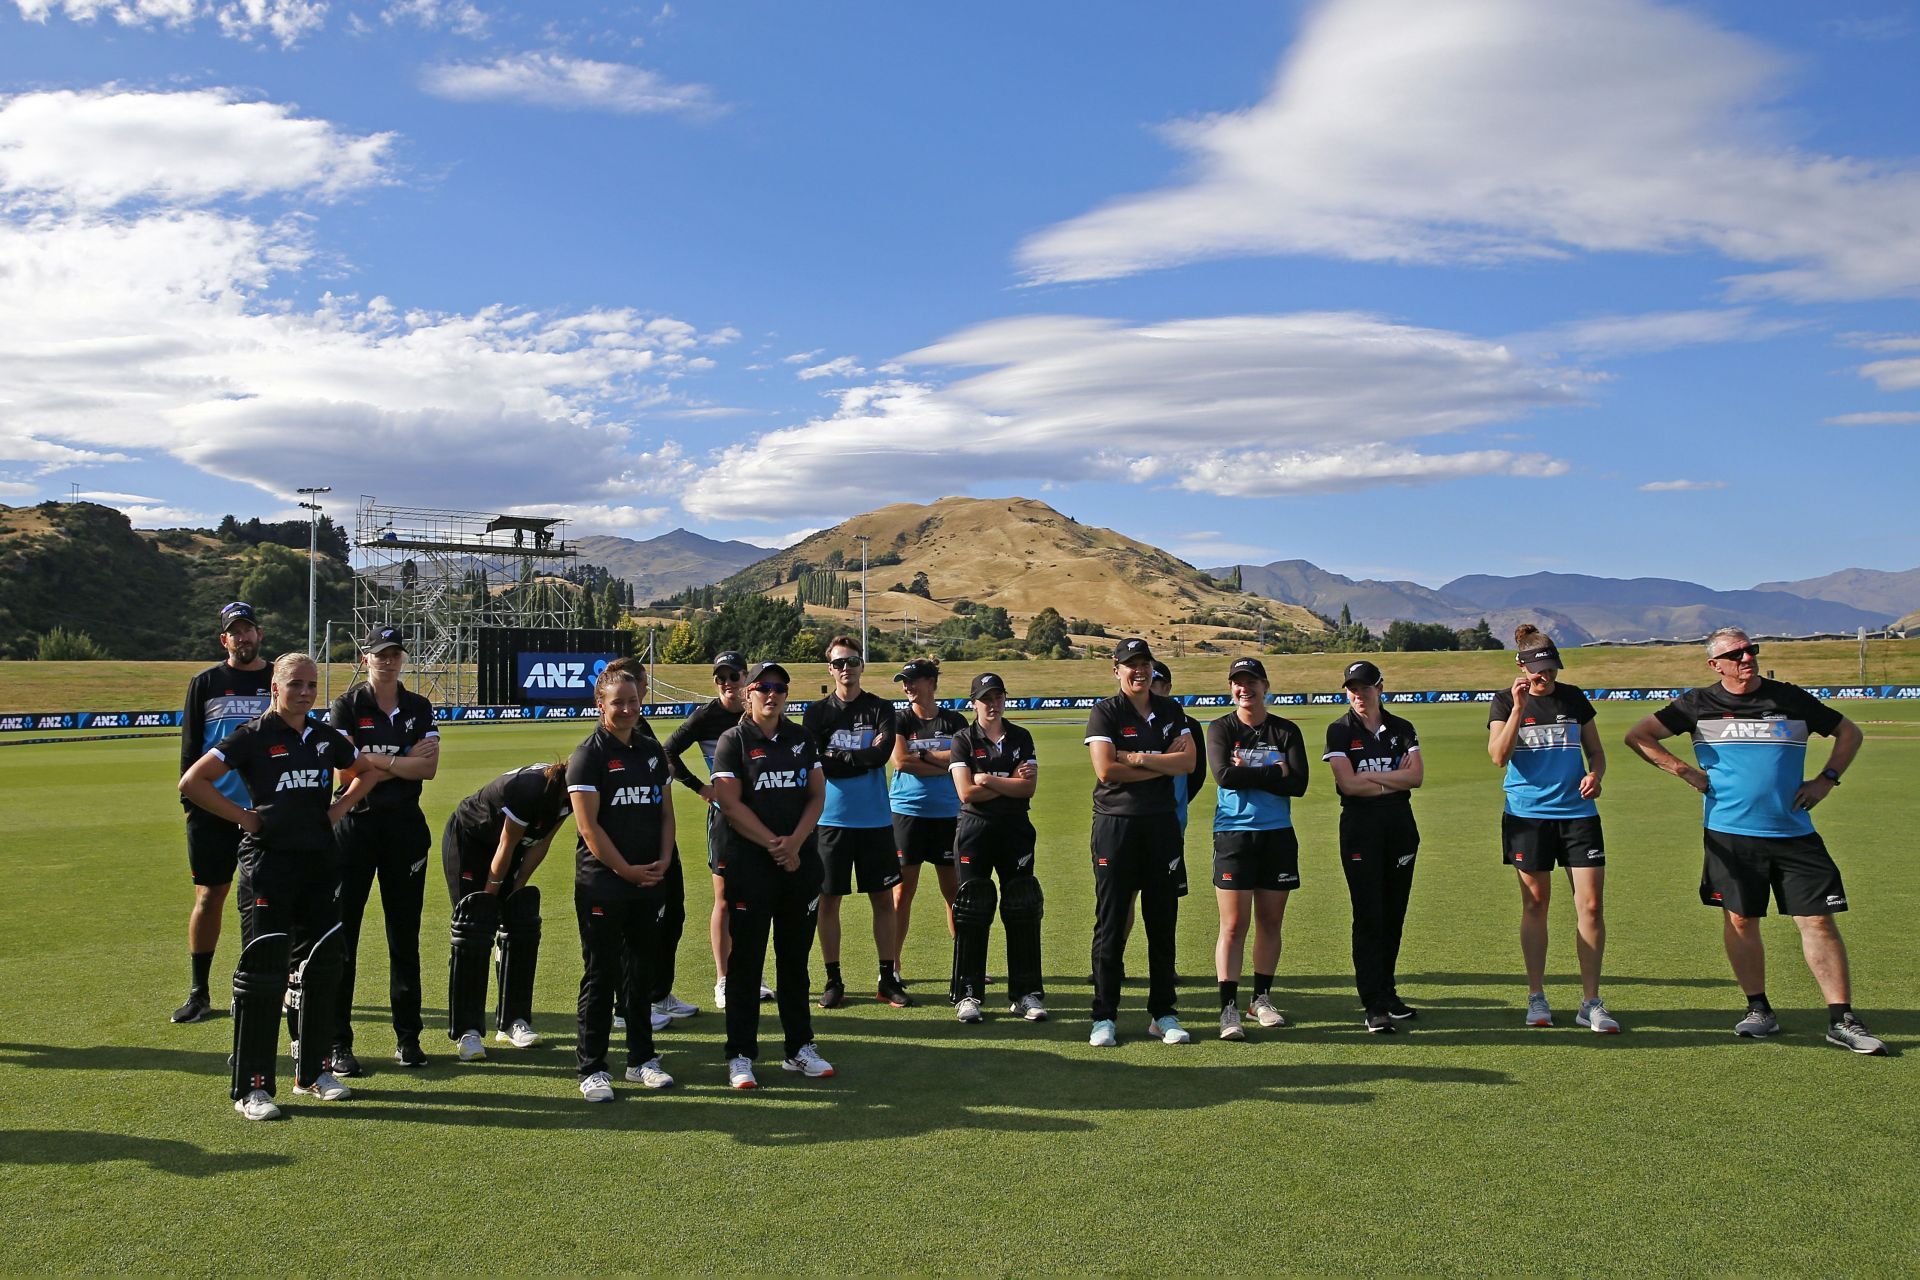 New Zealand v India - 2nd ODI in Queenstown